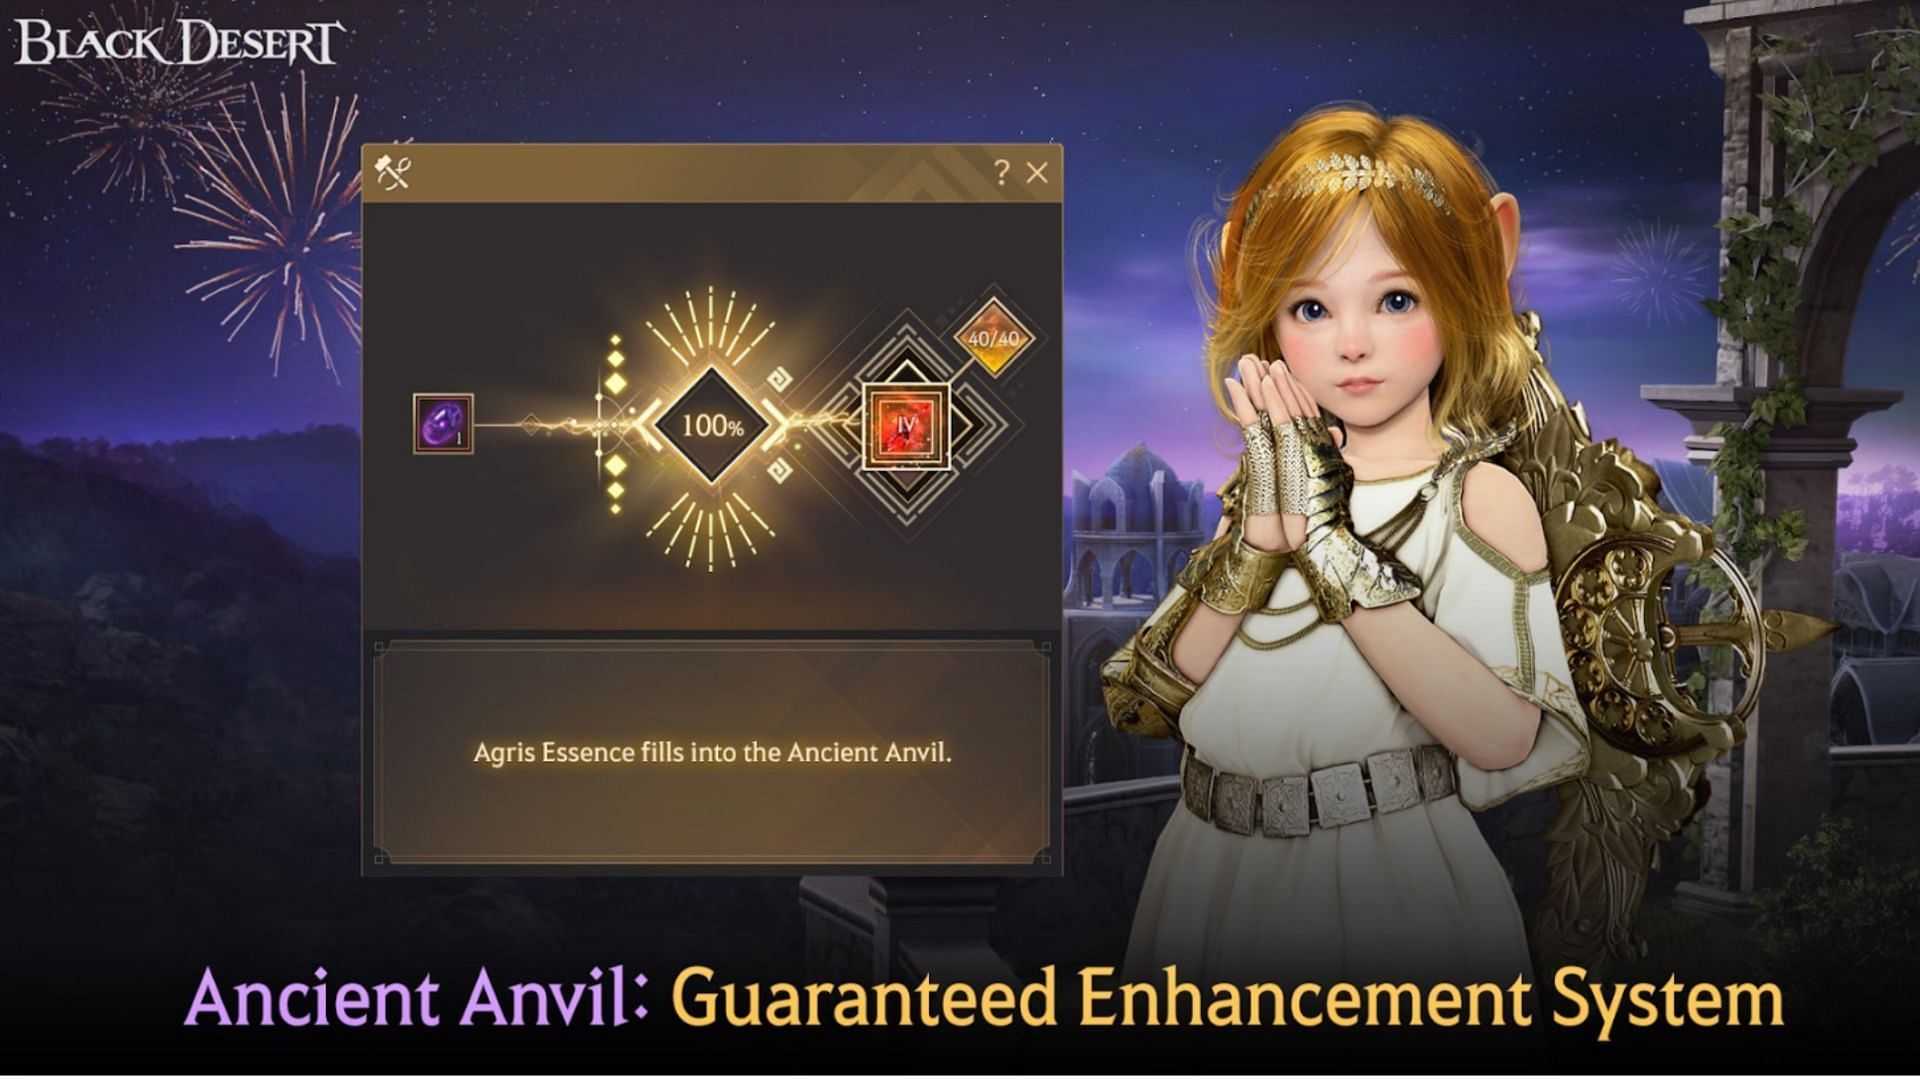 The Ancient Anvil effect will make it easier in the long run to enhance equipment in Black Desert Online (Image via Pearl Abyss)